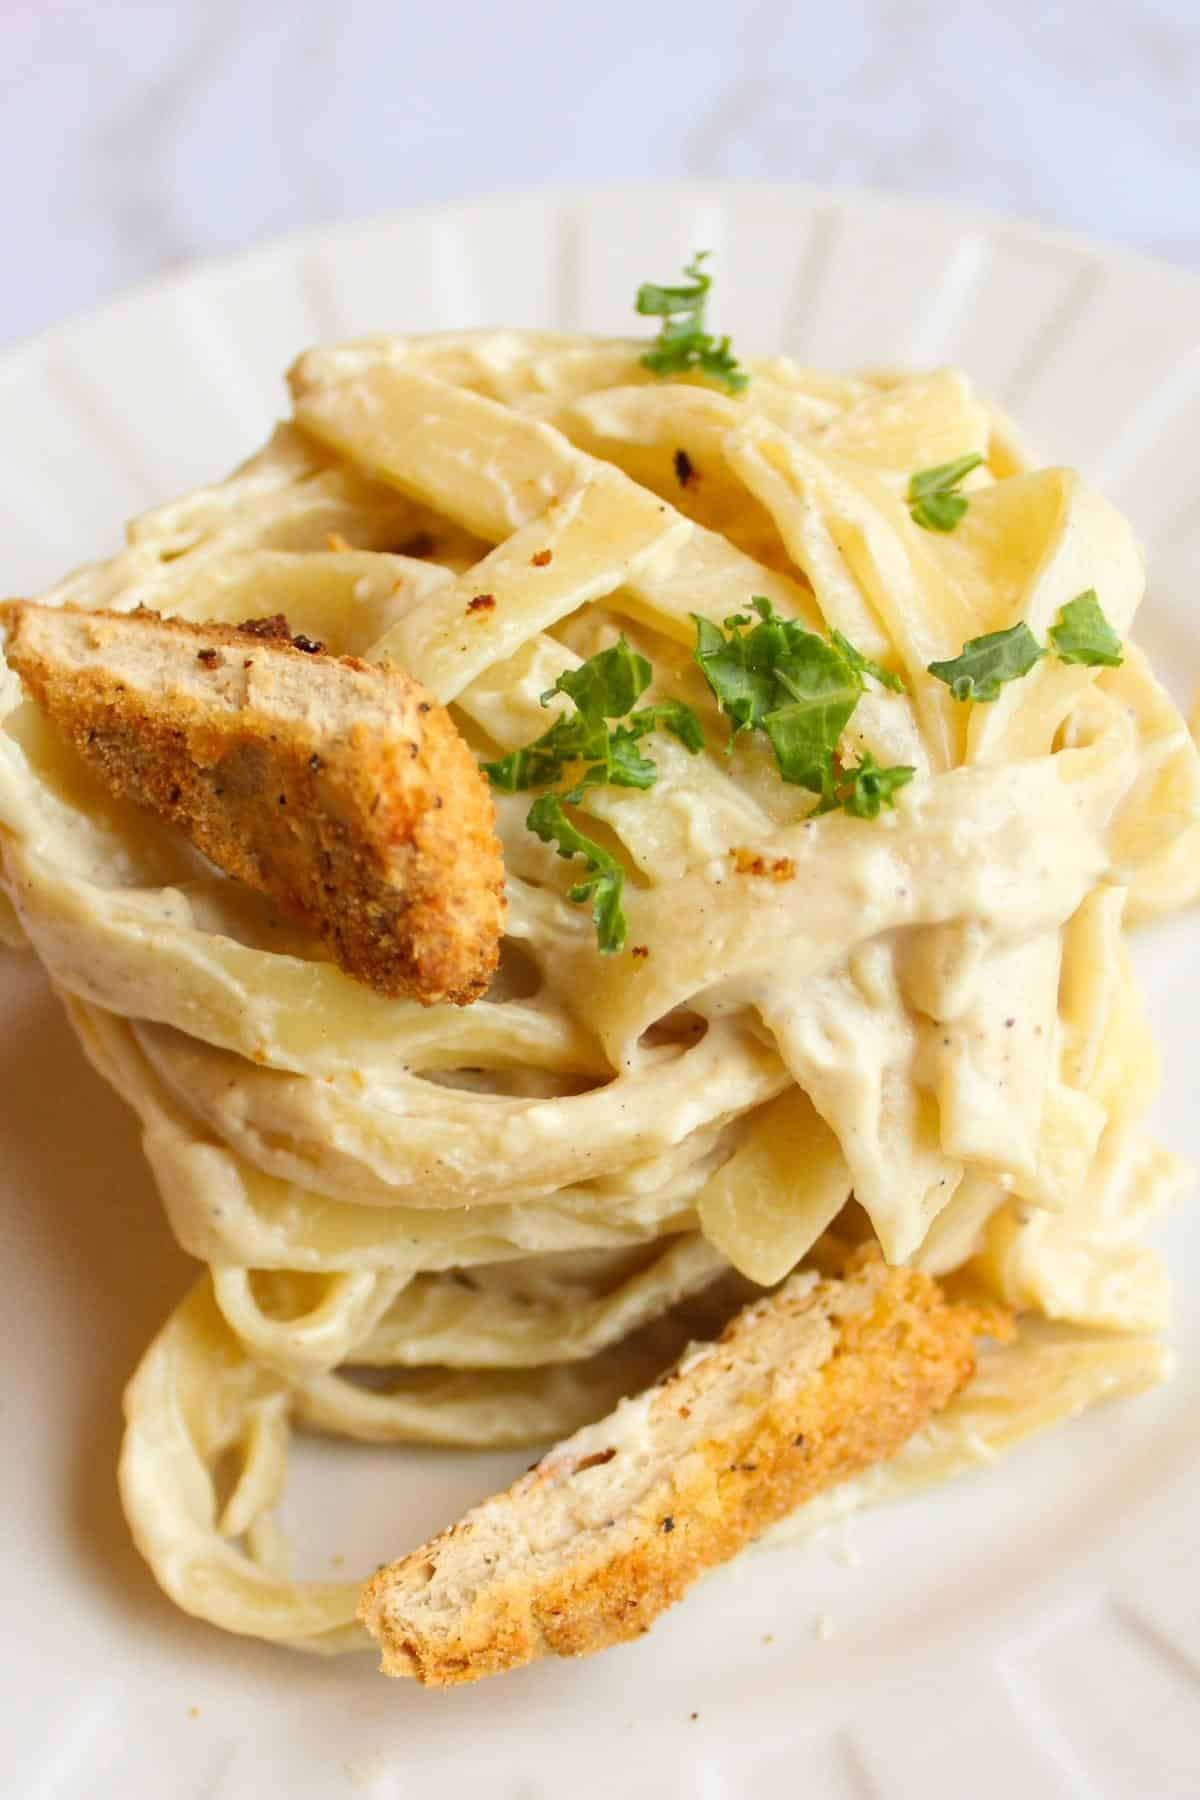 dairy free alfredo sauce on fettuccini noodles with vegan chicken